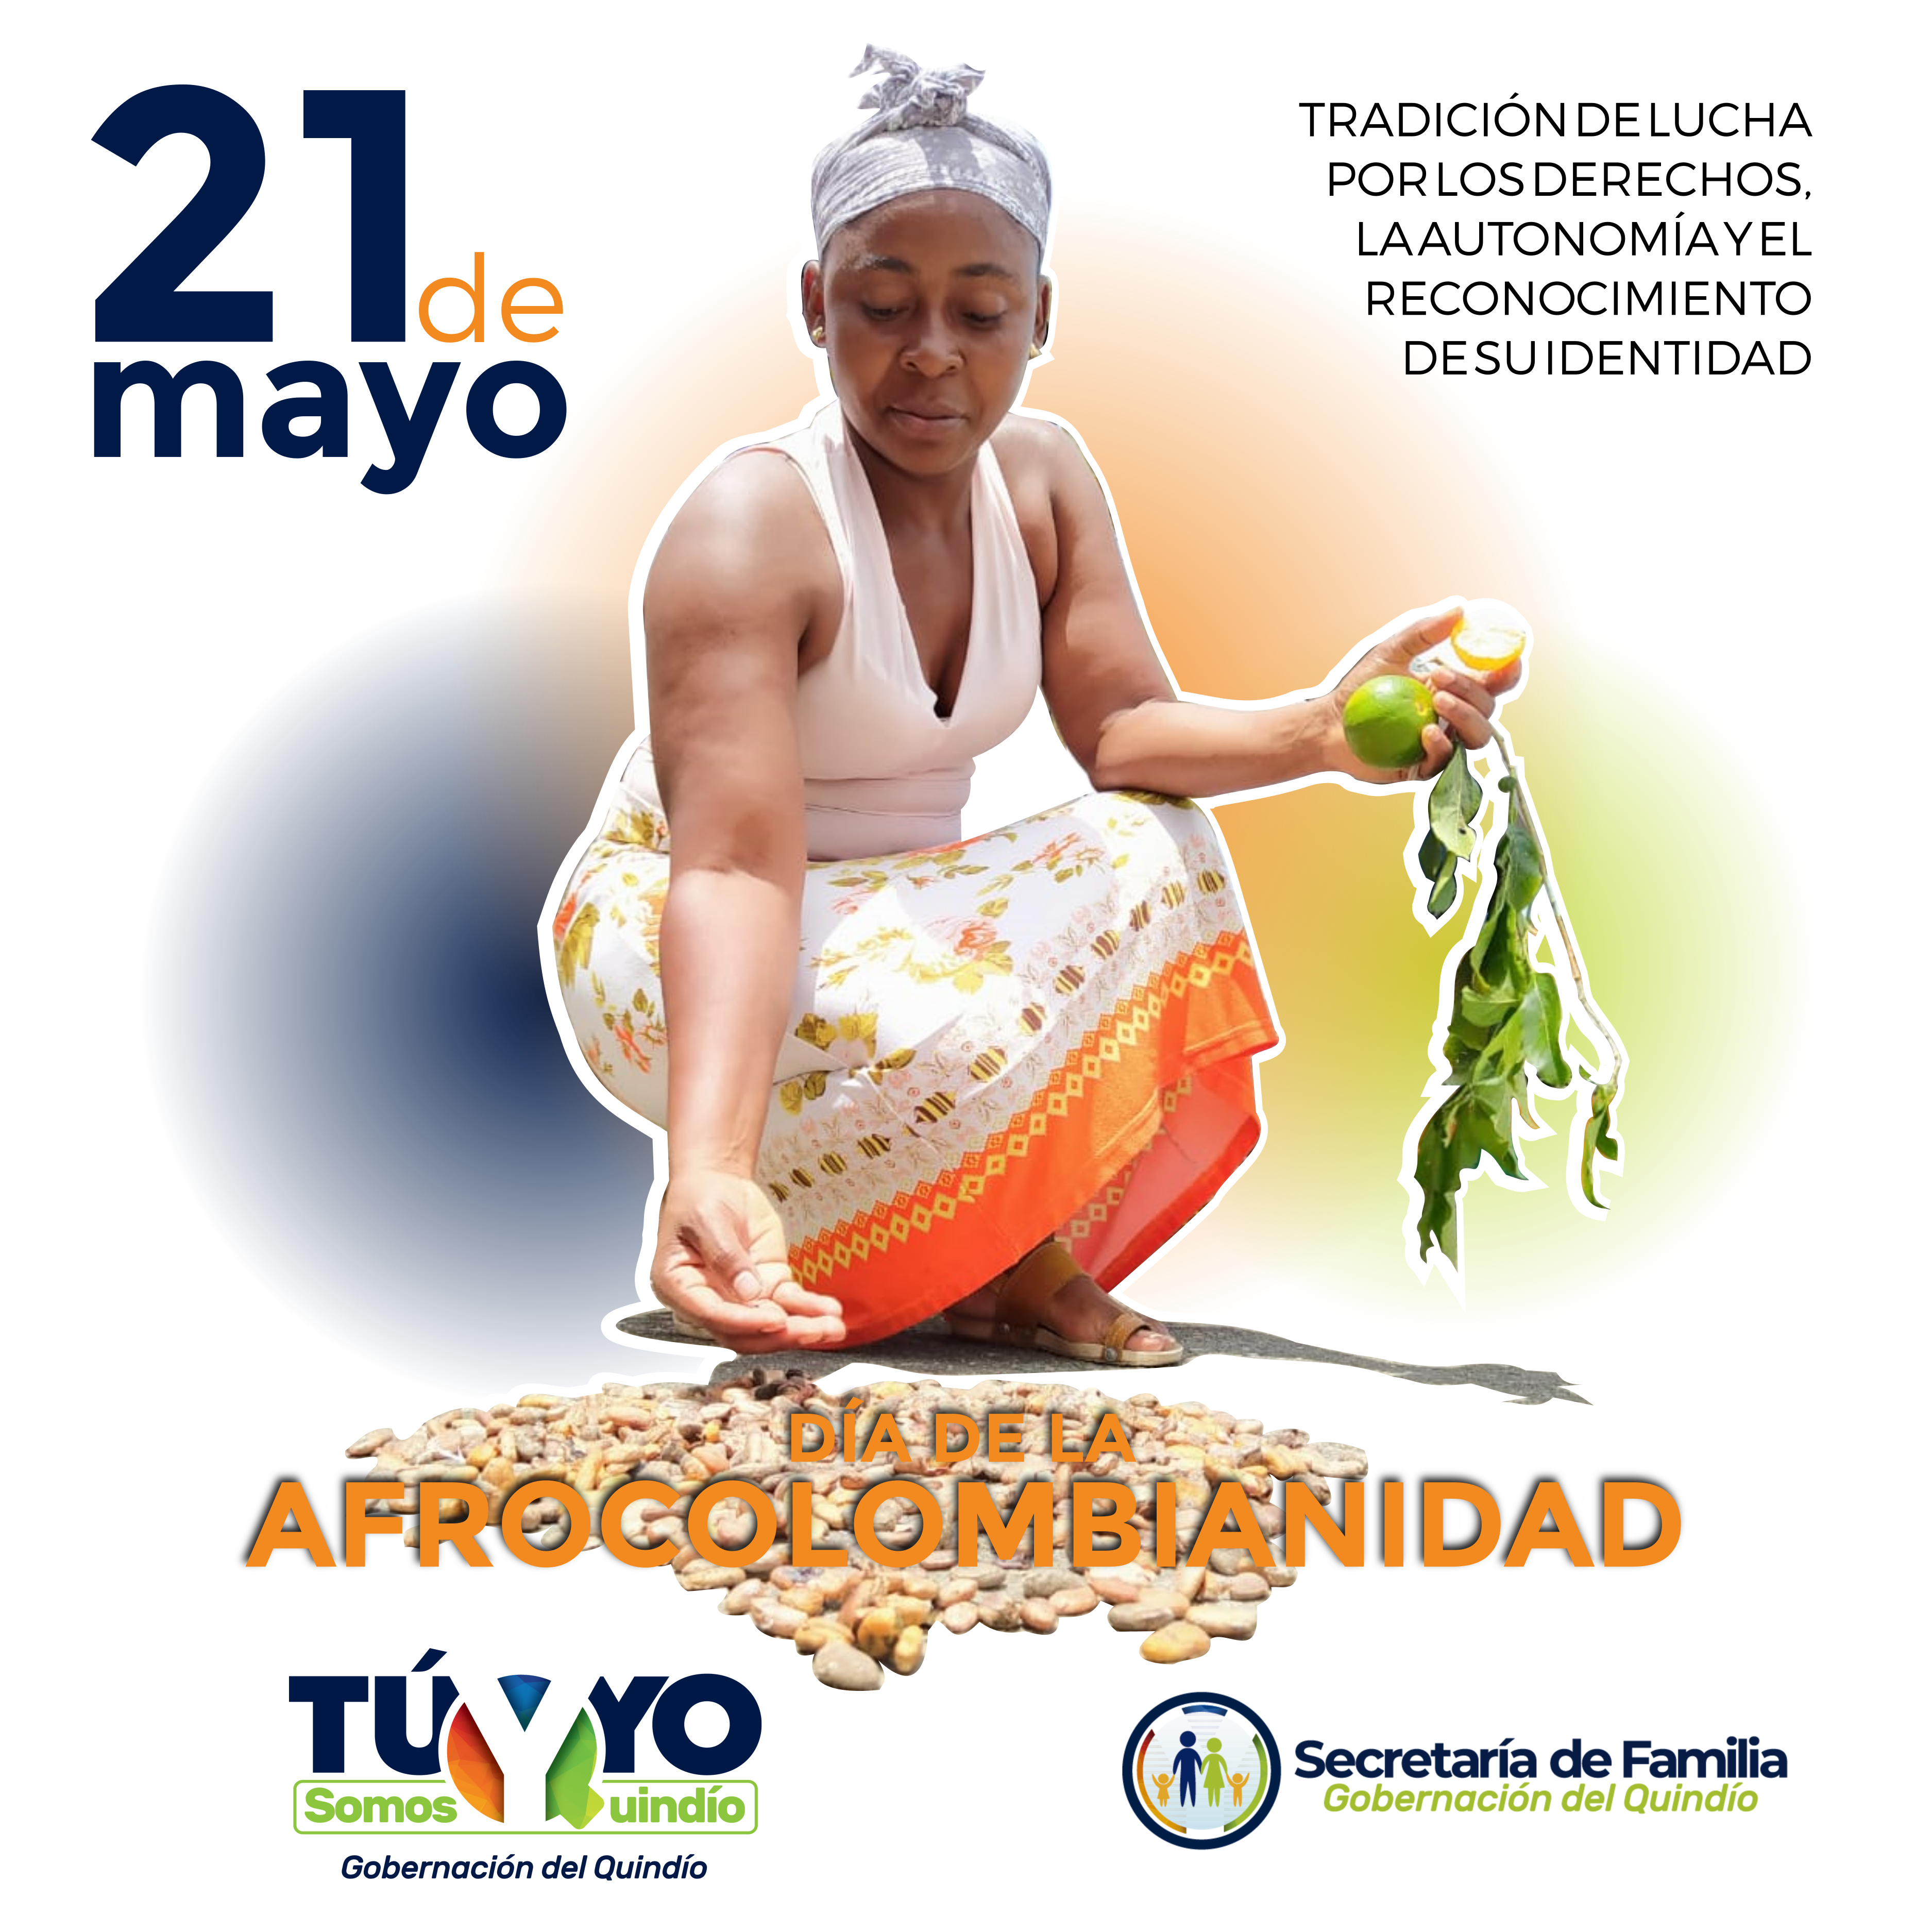 Afrocolombianidad.png - 5.36 MB